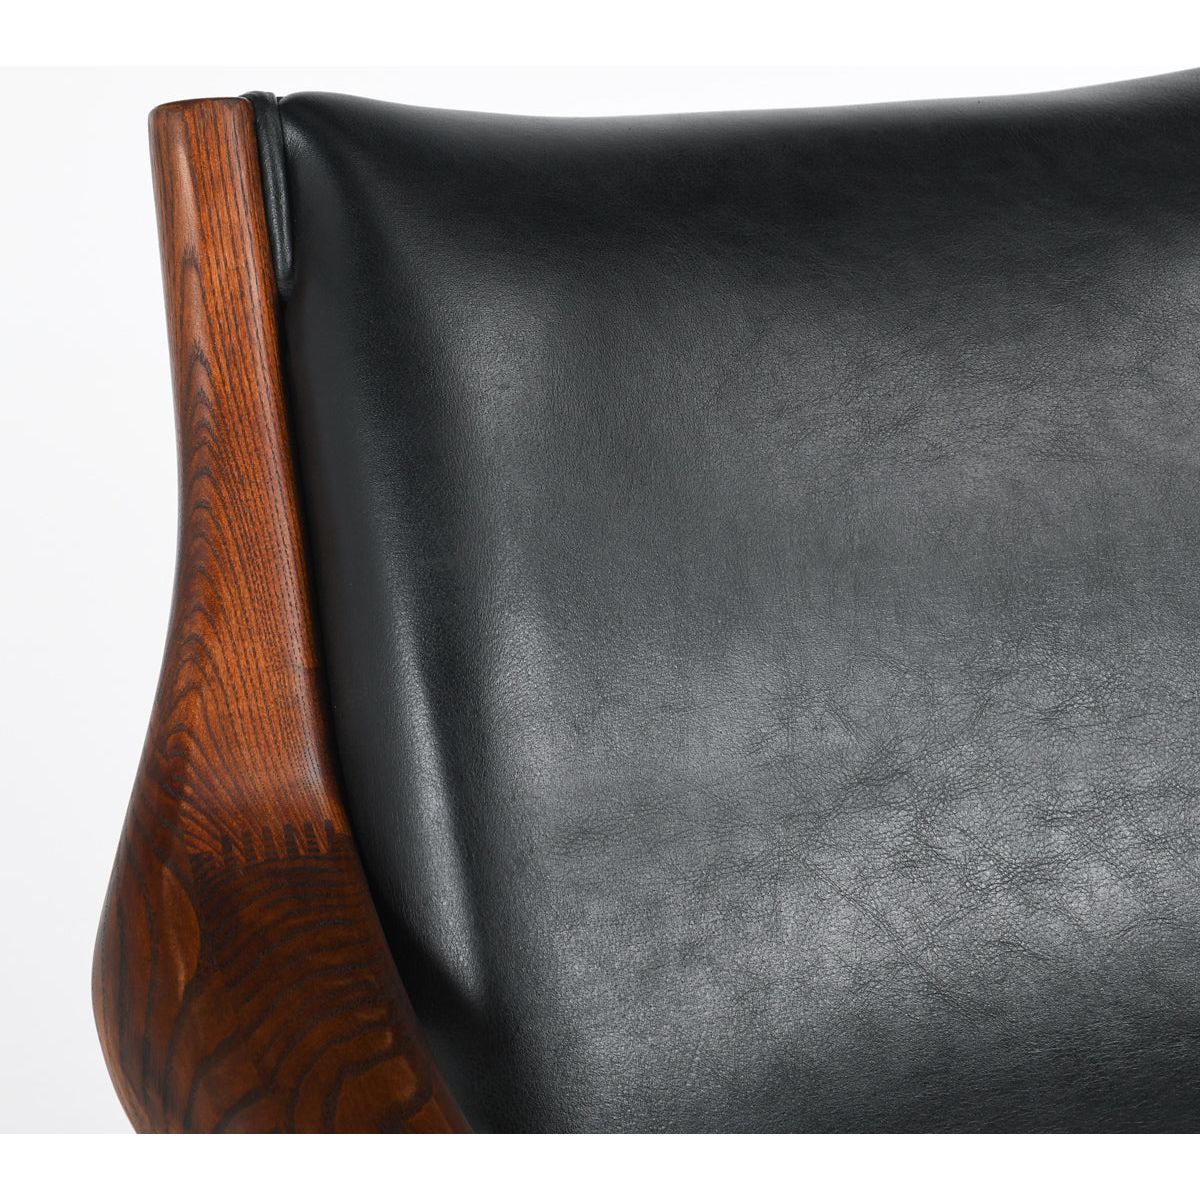 Close-up of a Benson Mid-Century Leather Accent Chair featuring a sleek black leather back and a richly textured walnut frame with visible grain, emphasizing the high-quality materials and craftsmanship.